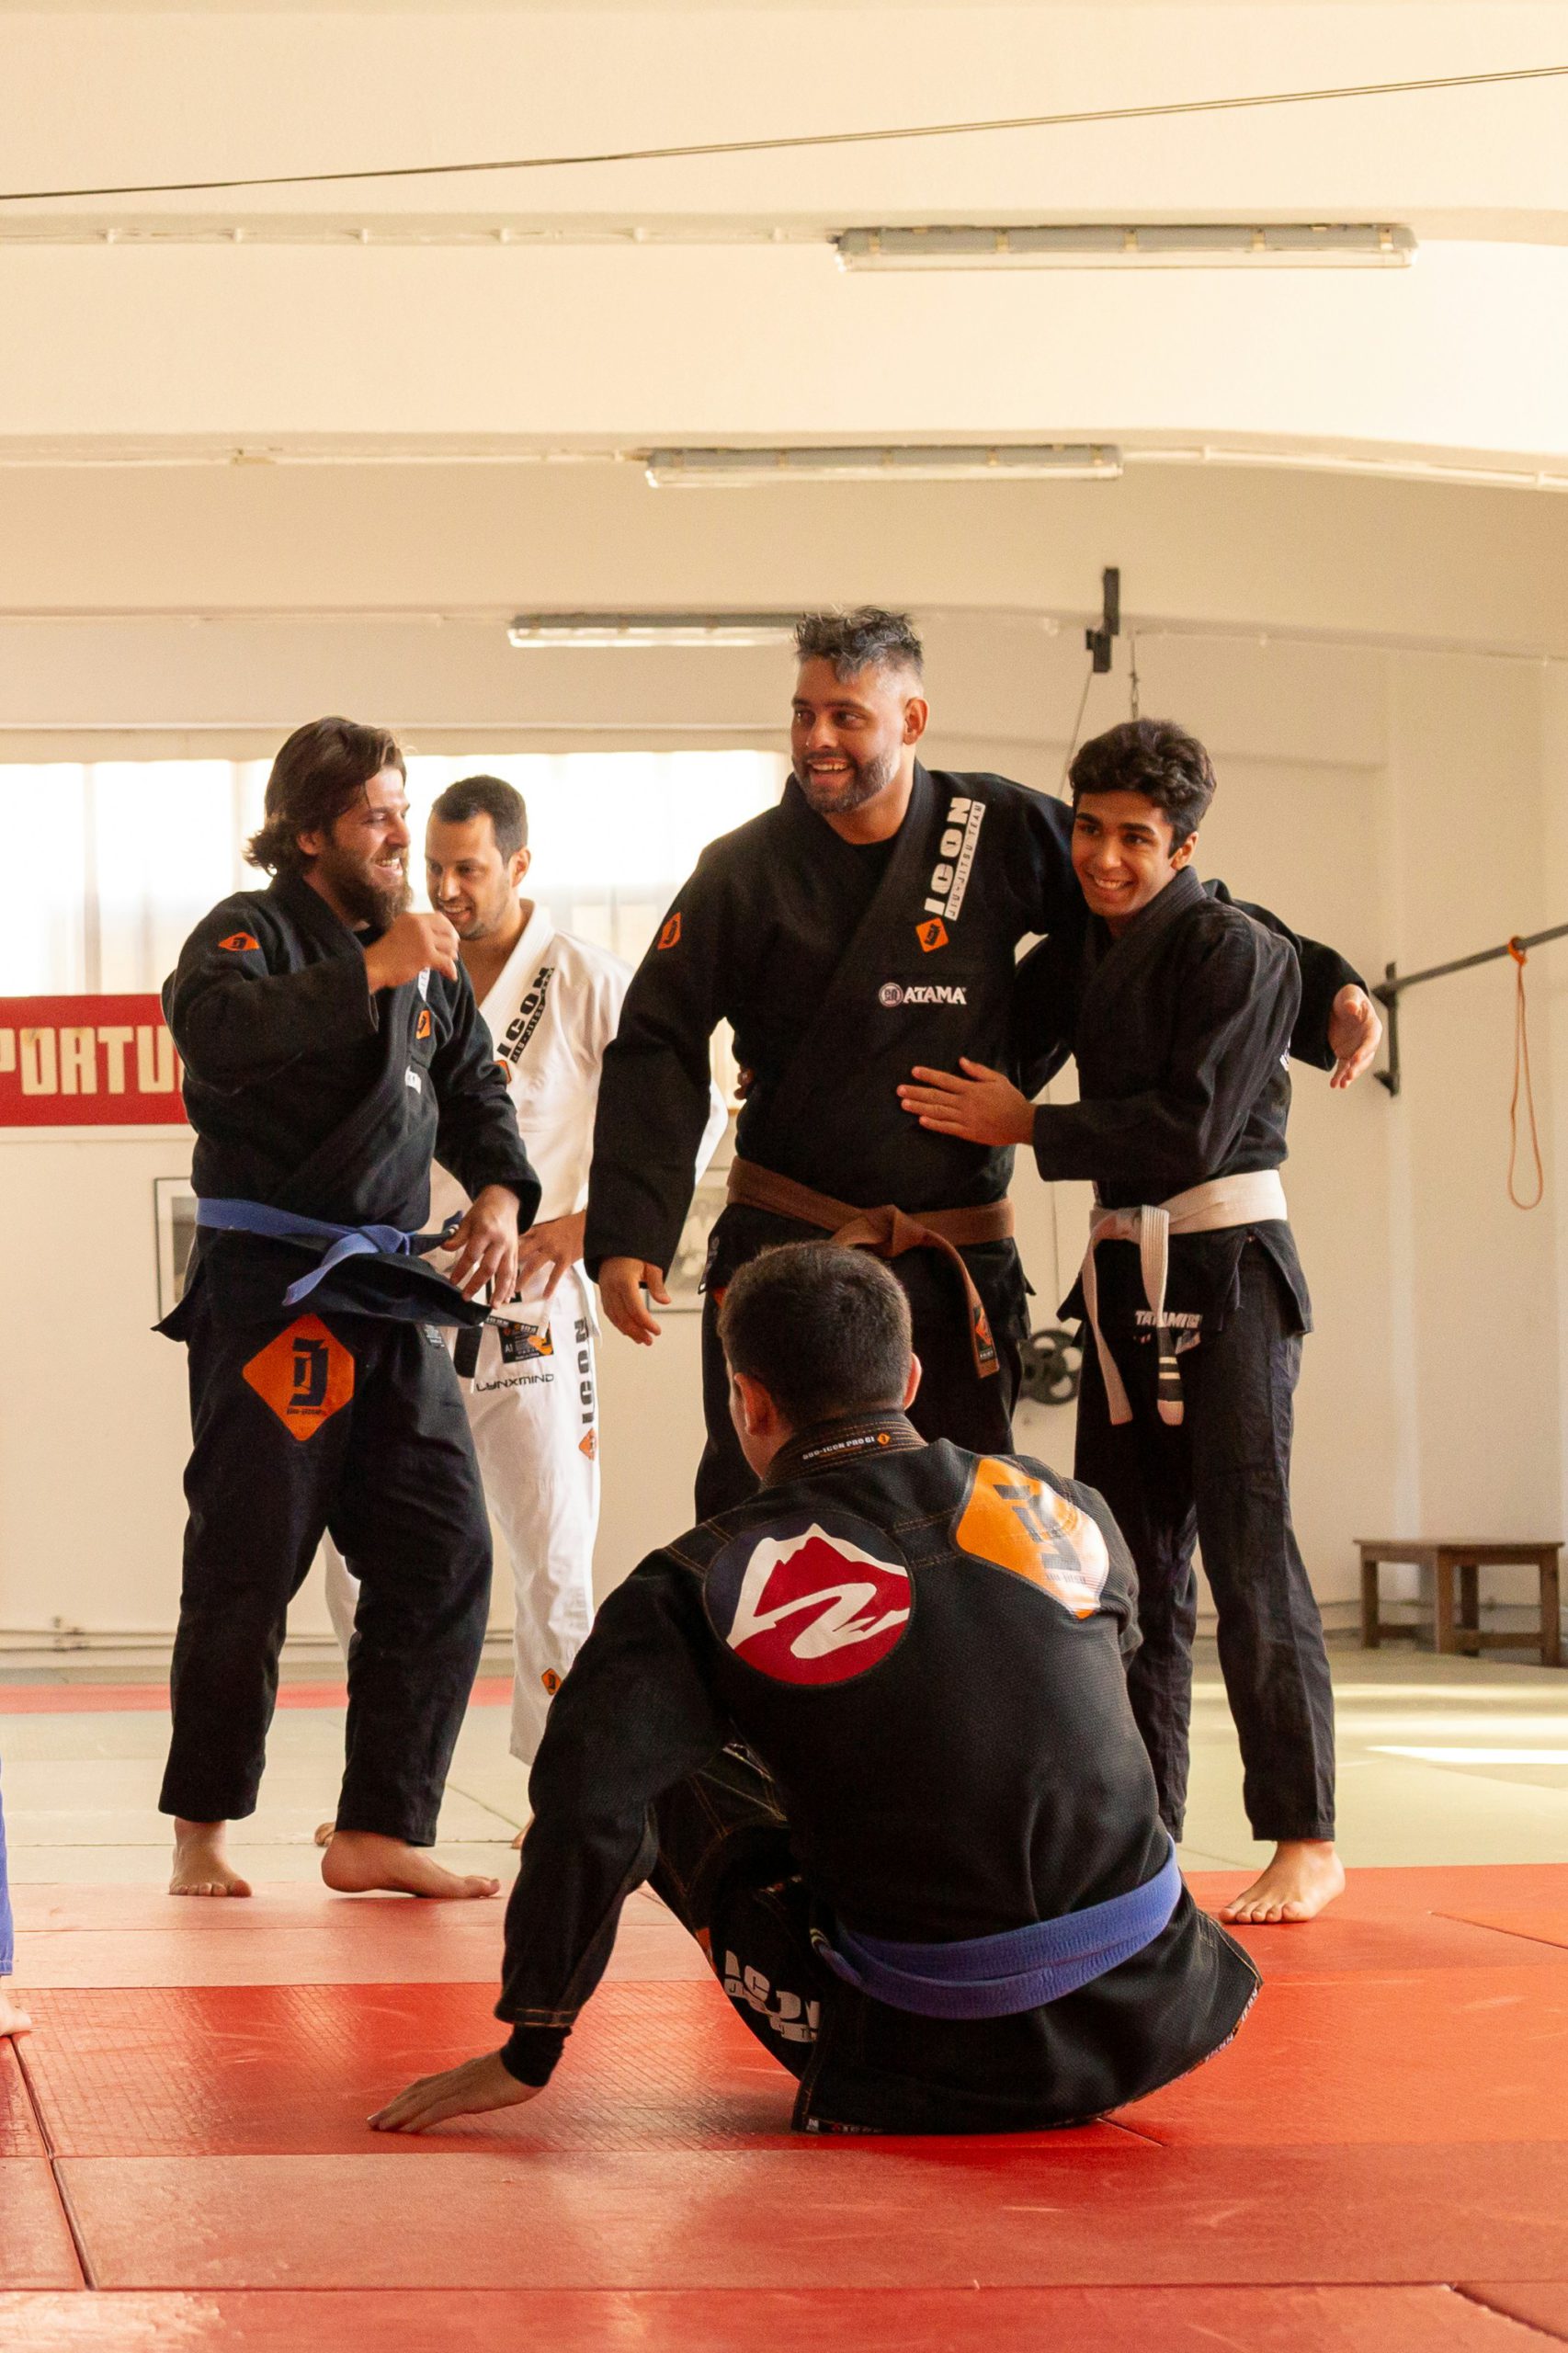 The instructor congratulating his students in a martial arts school.